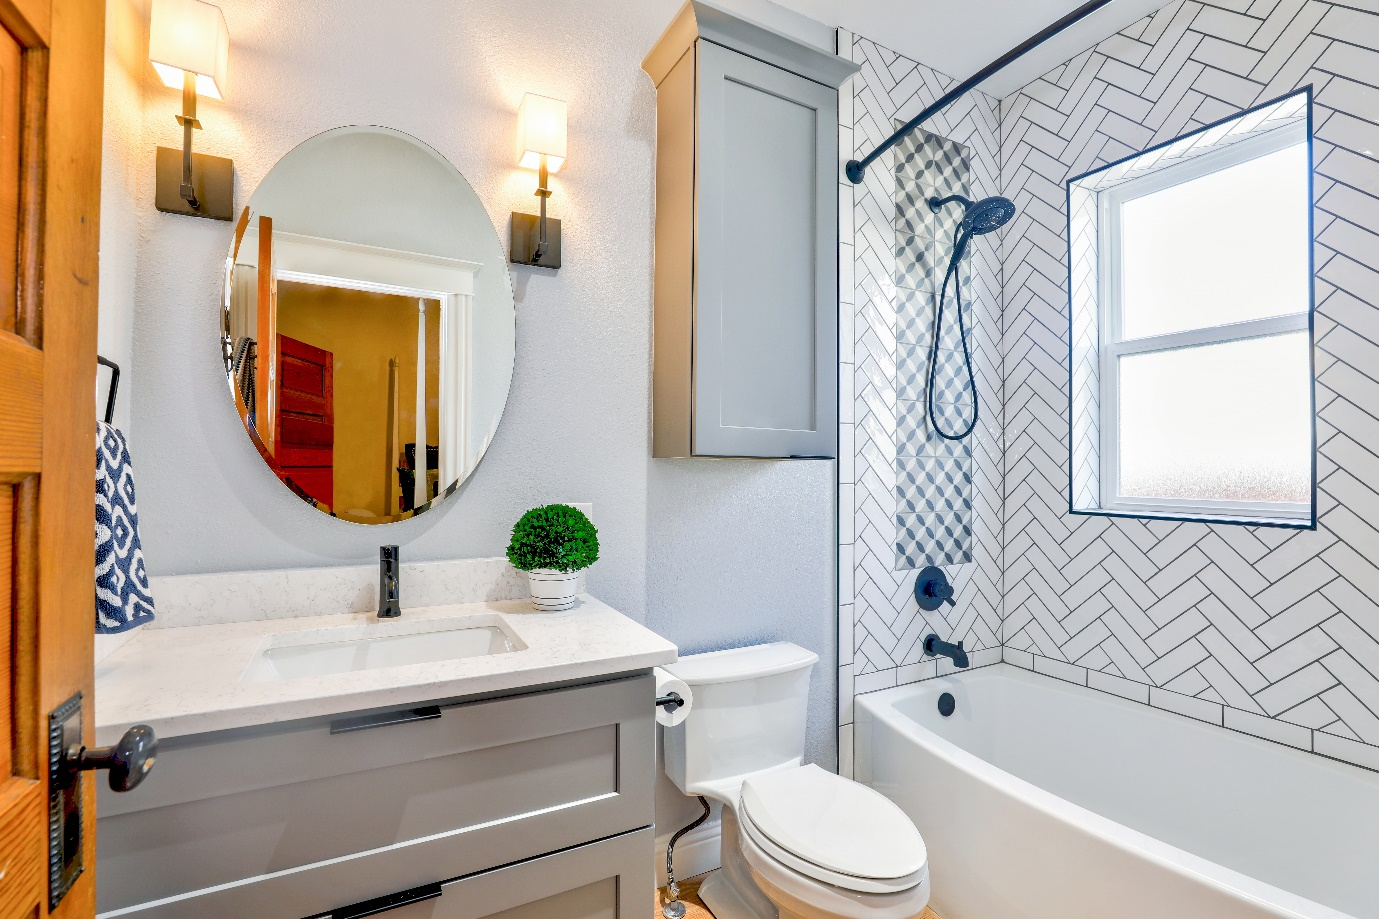 4 Easy Ways to Beautify a Bathroom Without Any Major Remodeling